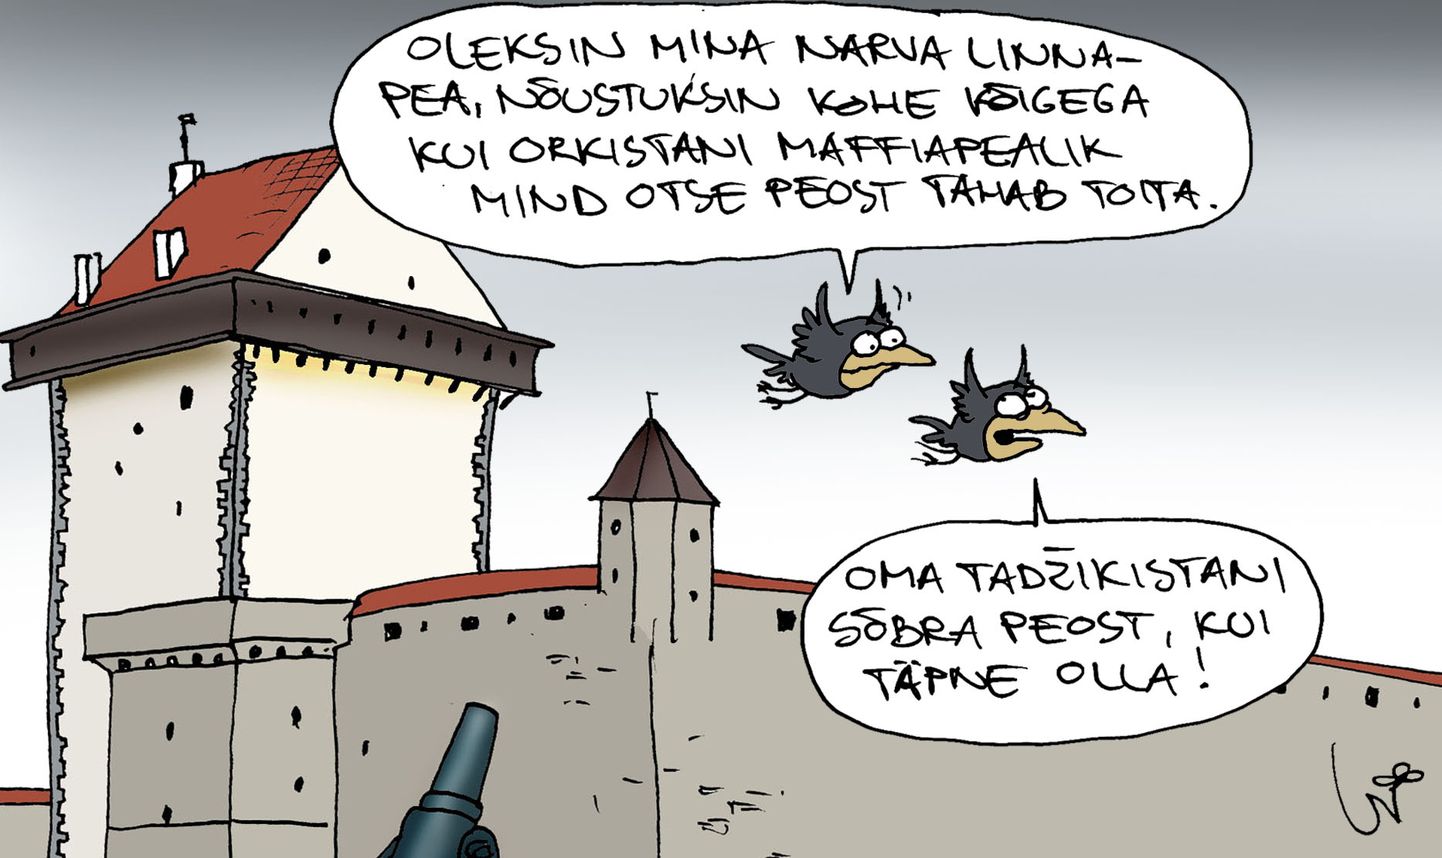 «If I were the mayor of Narva, I would immediately agree to anything if the mafia boss of Orcistan wanted to feed me directly from the hand. – The hand of his Tajik friend, to be exact!» Daily caricature, April 8.